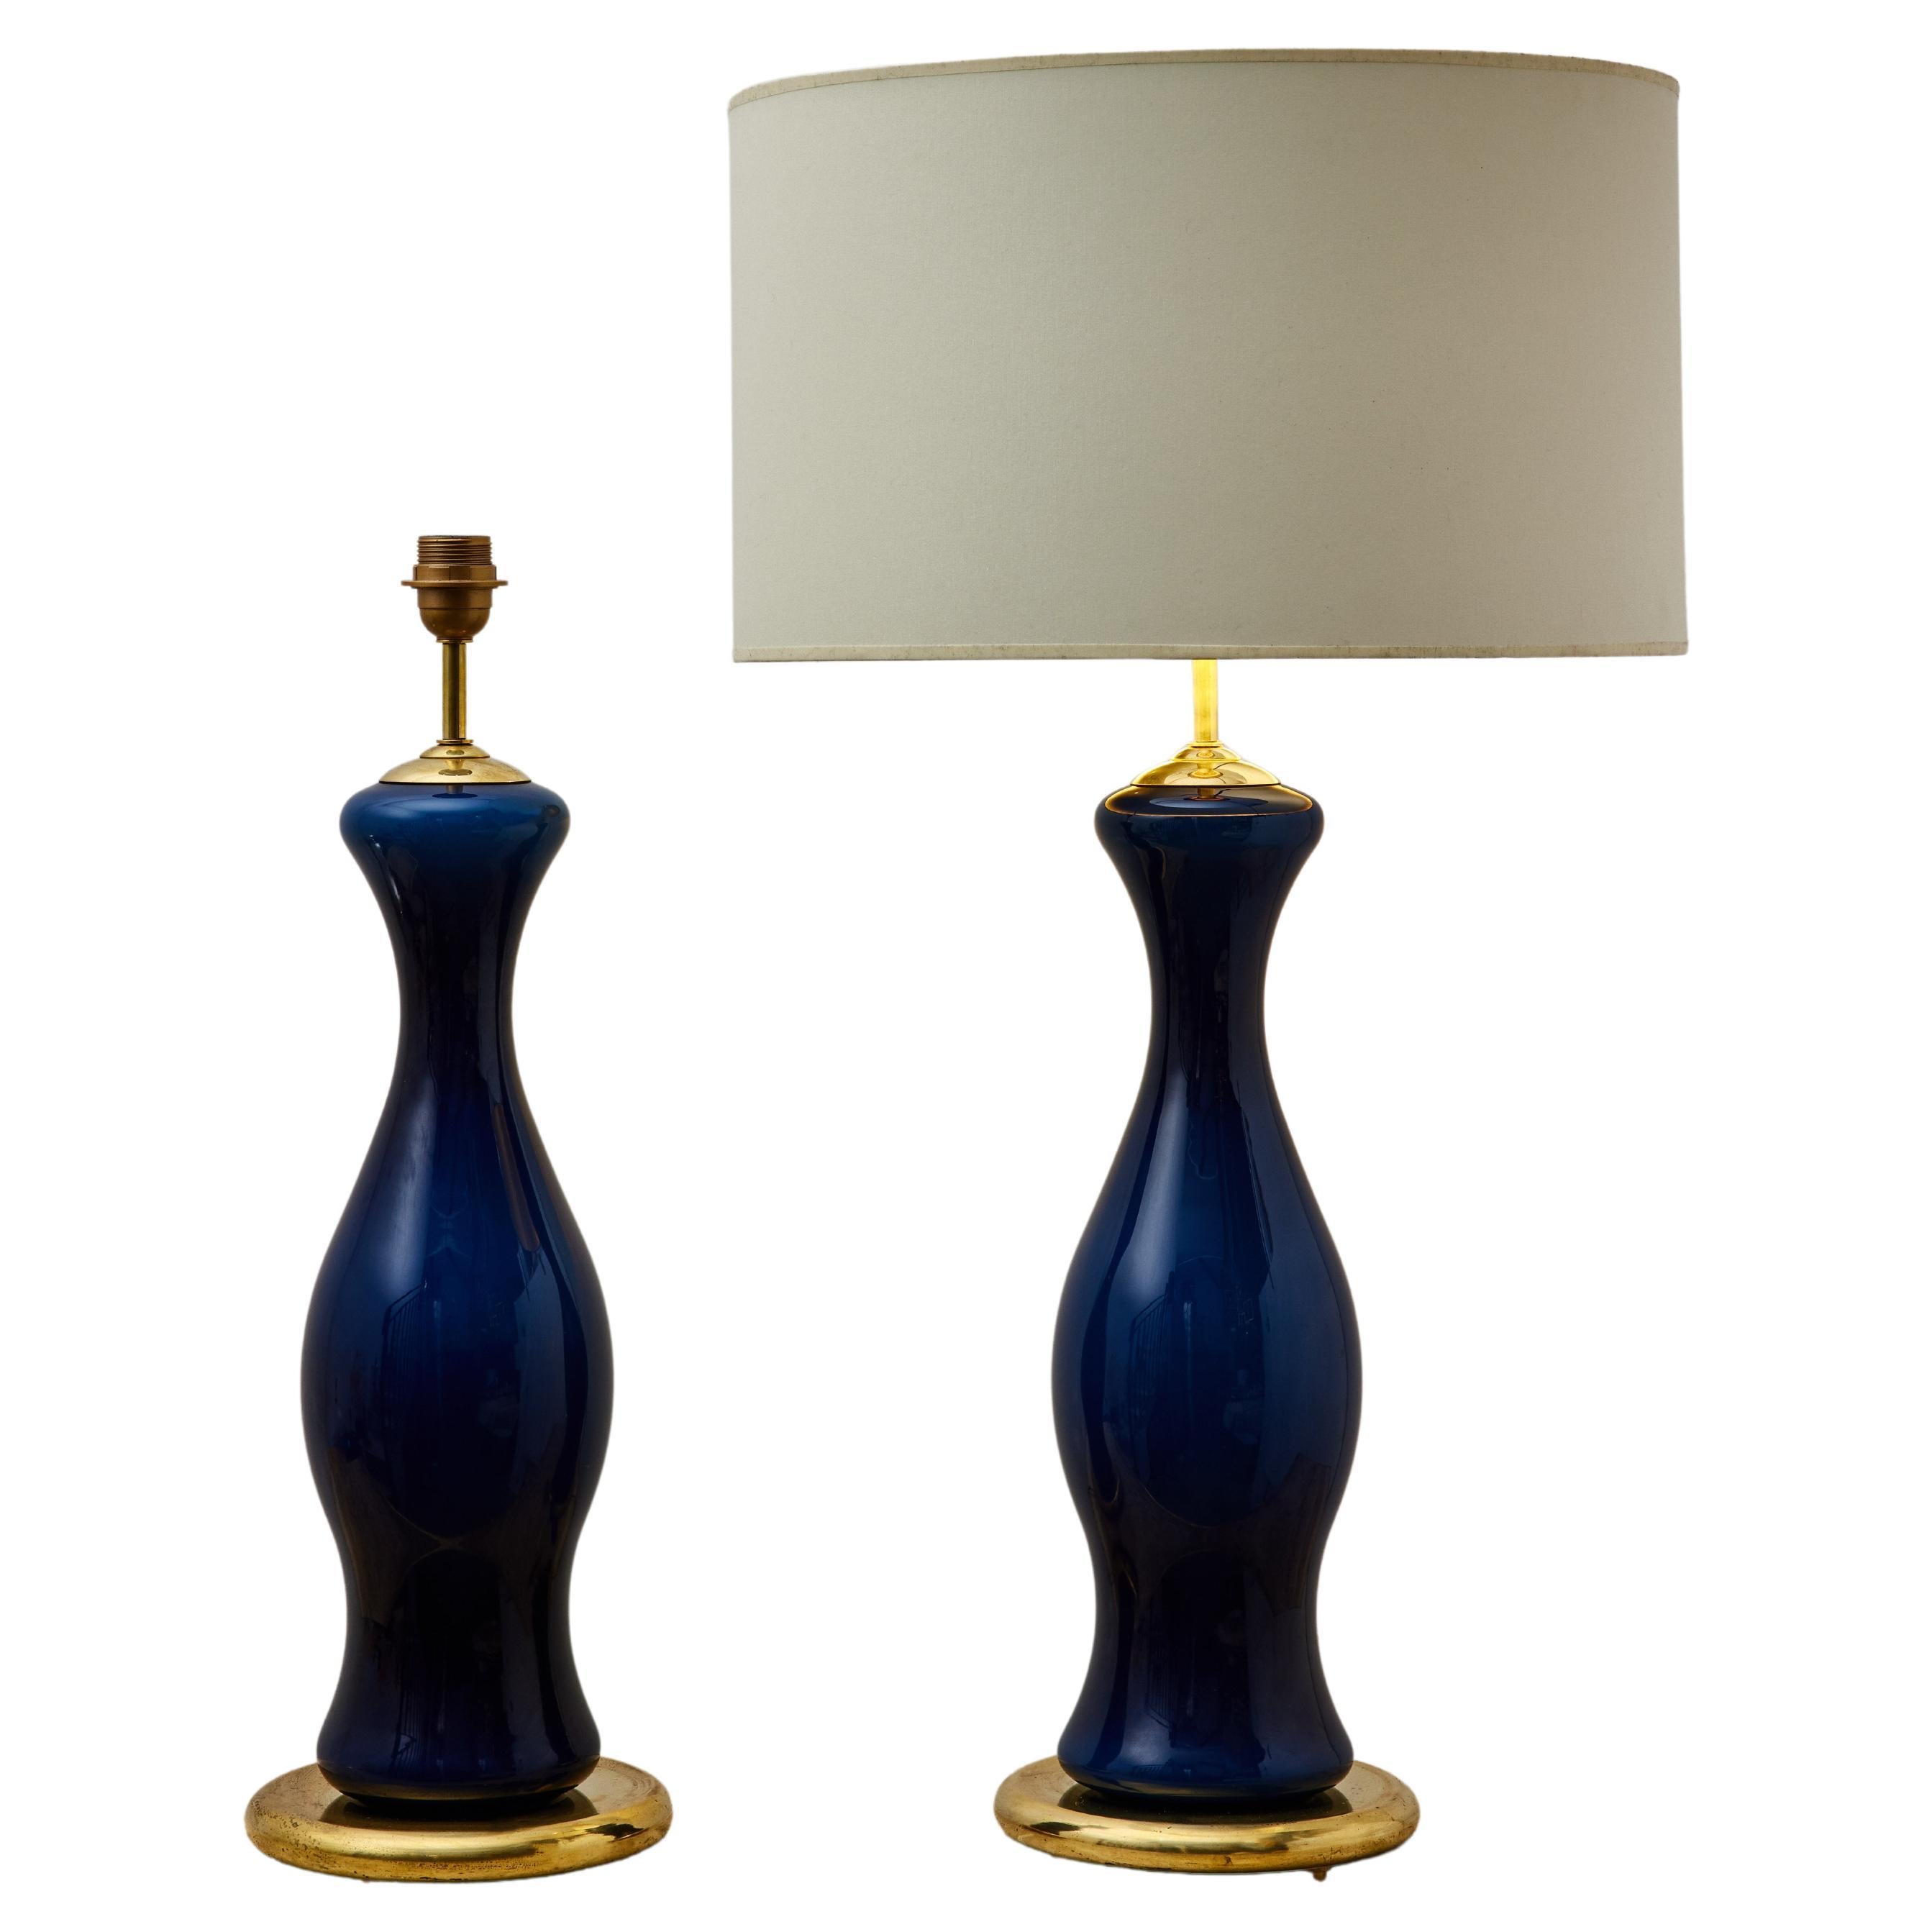 Murano Glass Table Lamps at Cost Price For Sale